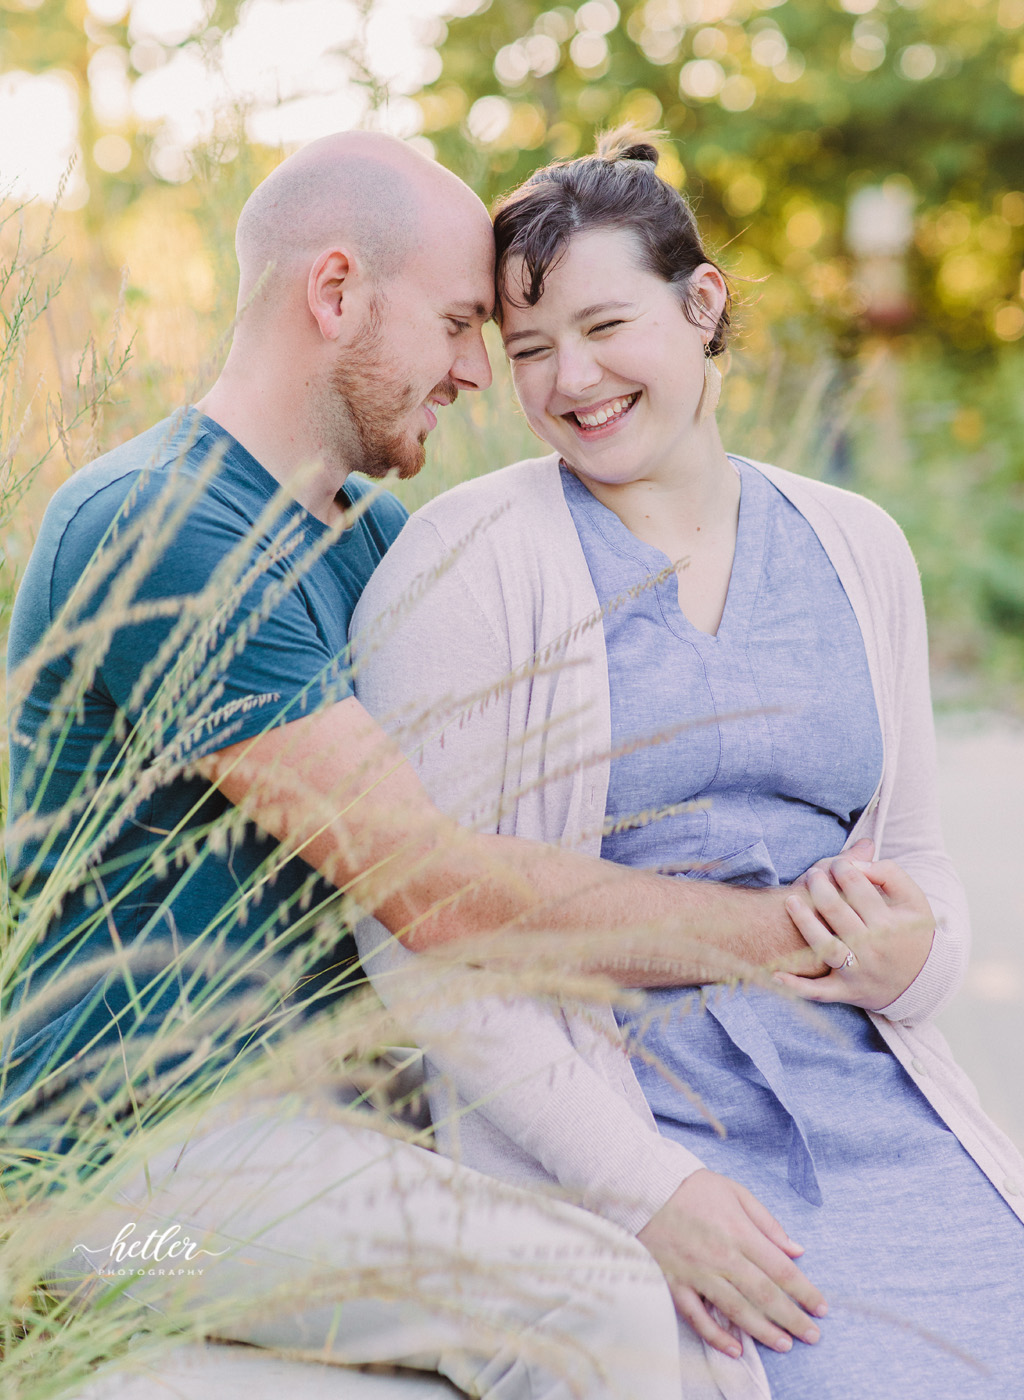 Engagement photo session at Calvin College's Ecosystem Preserve in Grand Rapids Michigan